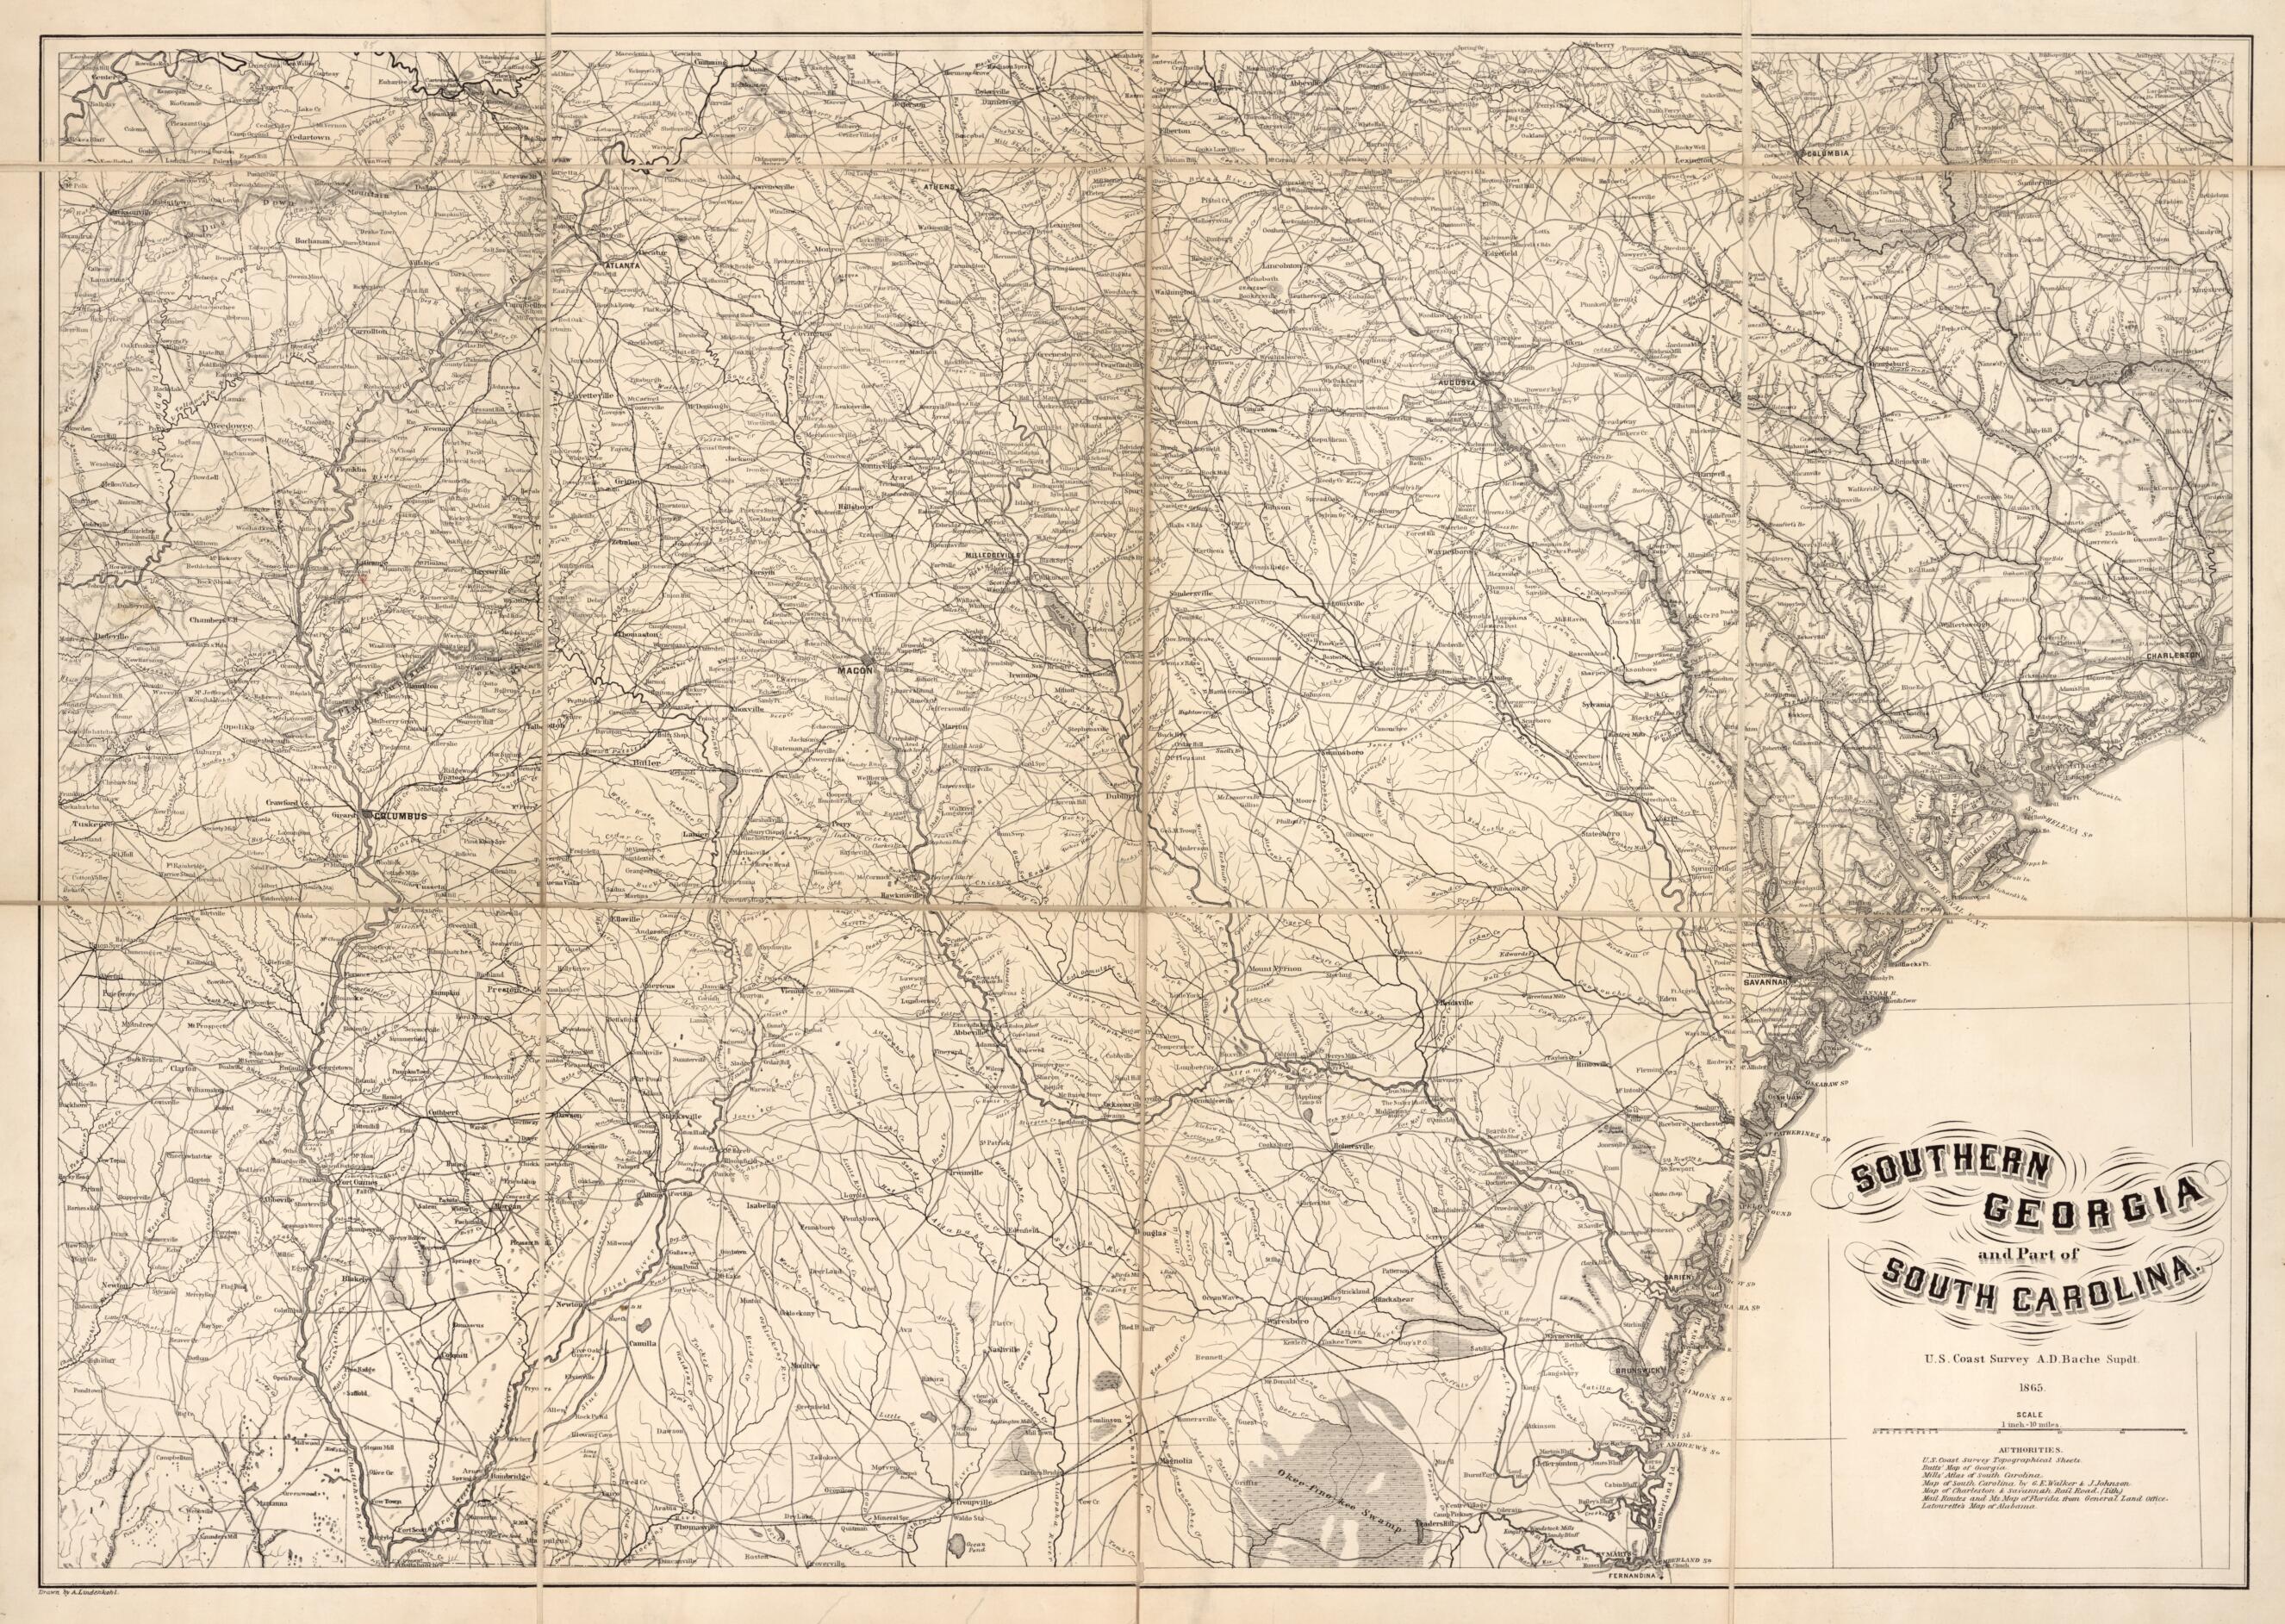 This old map of Southern Georgia and Part of South Carolina from 1865 was created by A. D. (Alexander Dallas) Bache, A. Lindenkohl,  United States Coast Survey in 1865